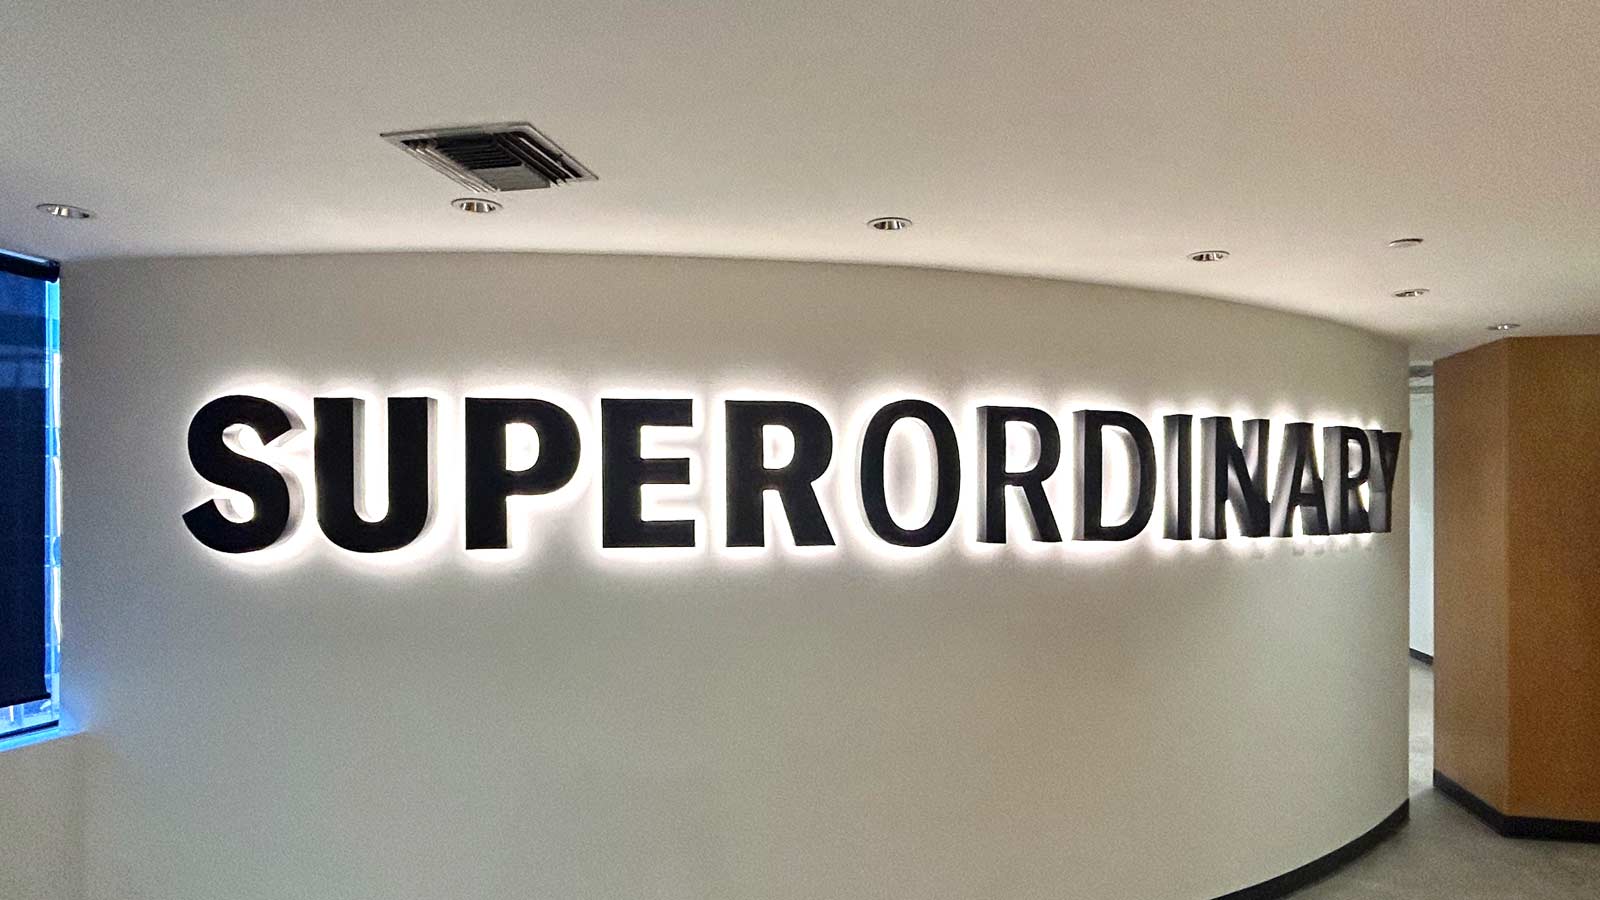 superordinary reverse channel letters installed on the wall